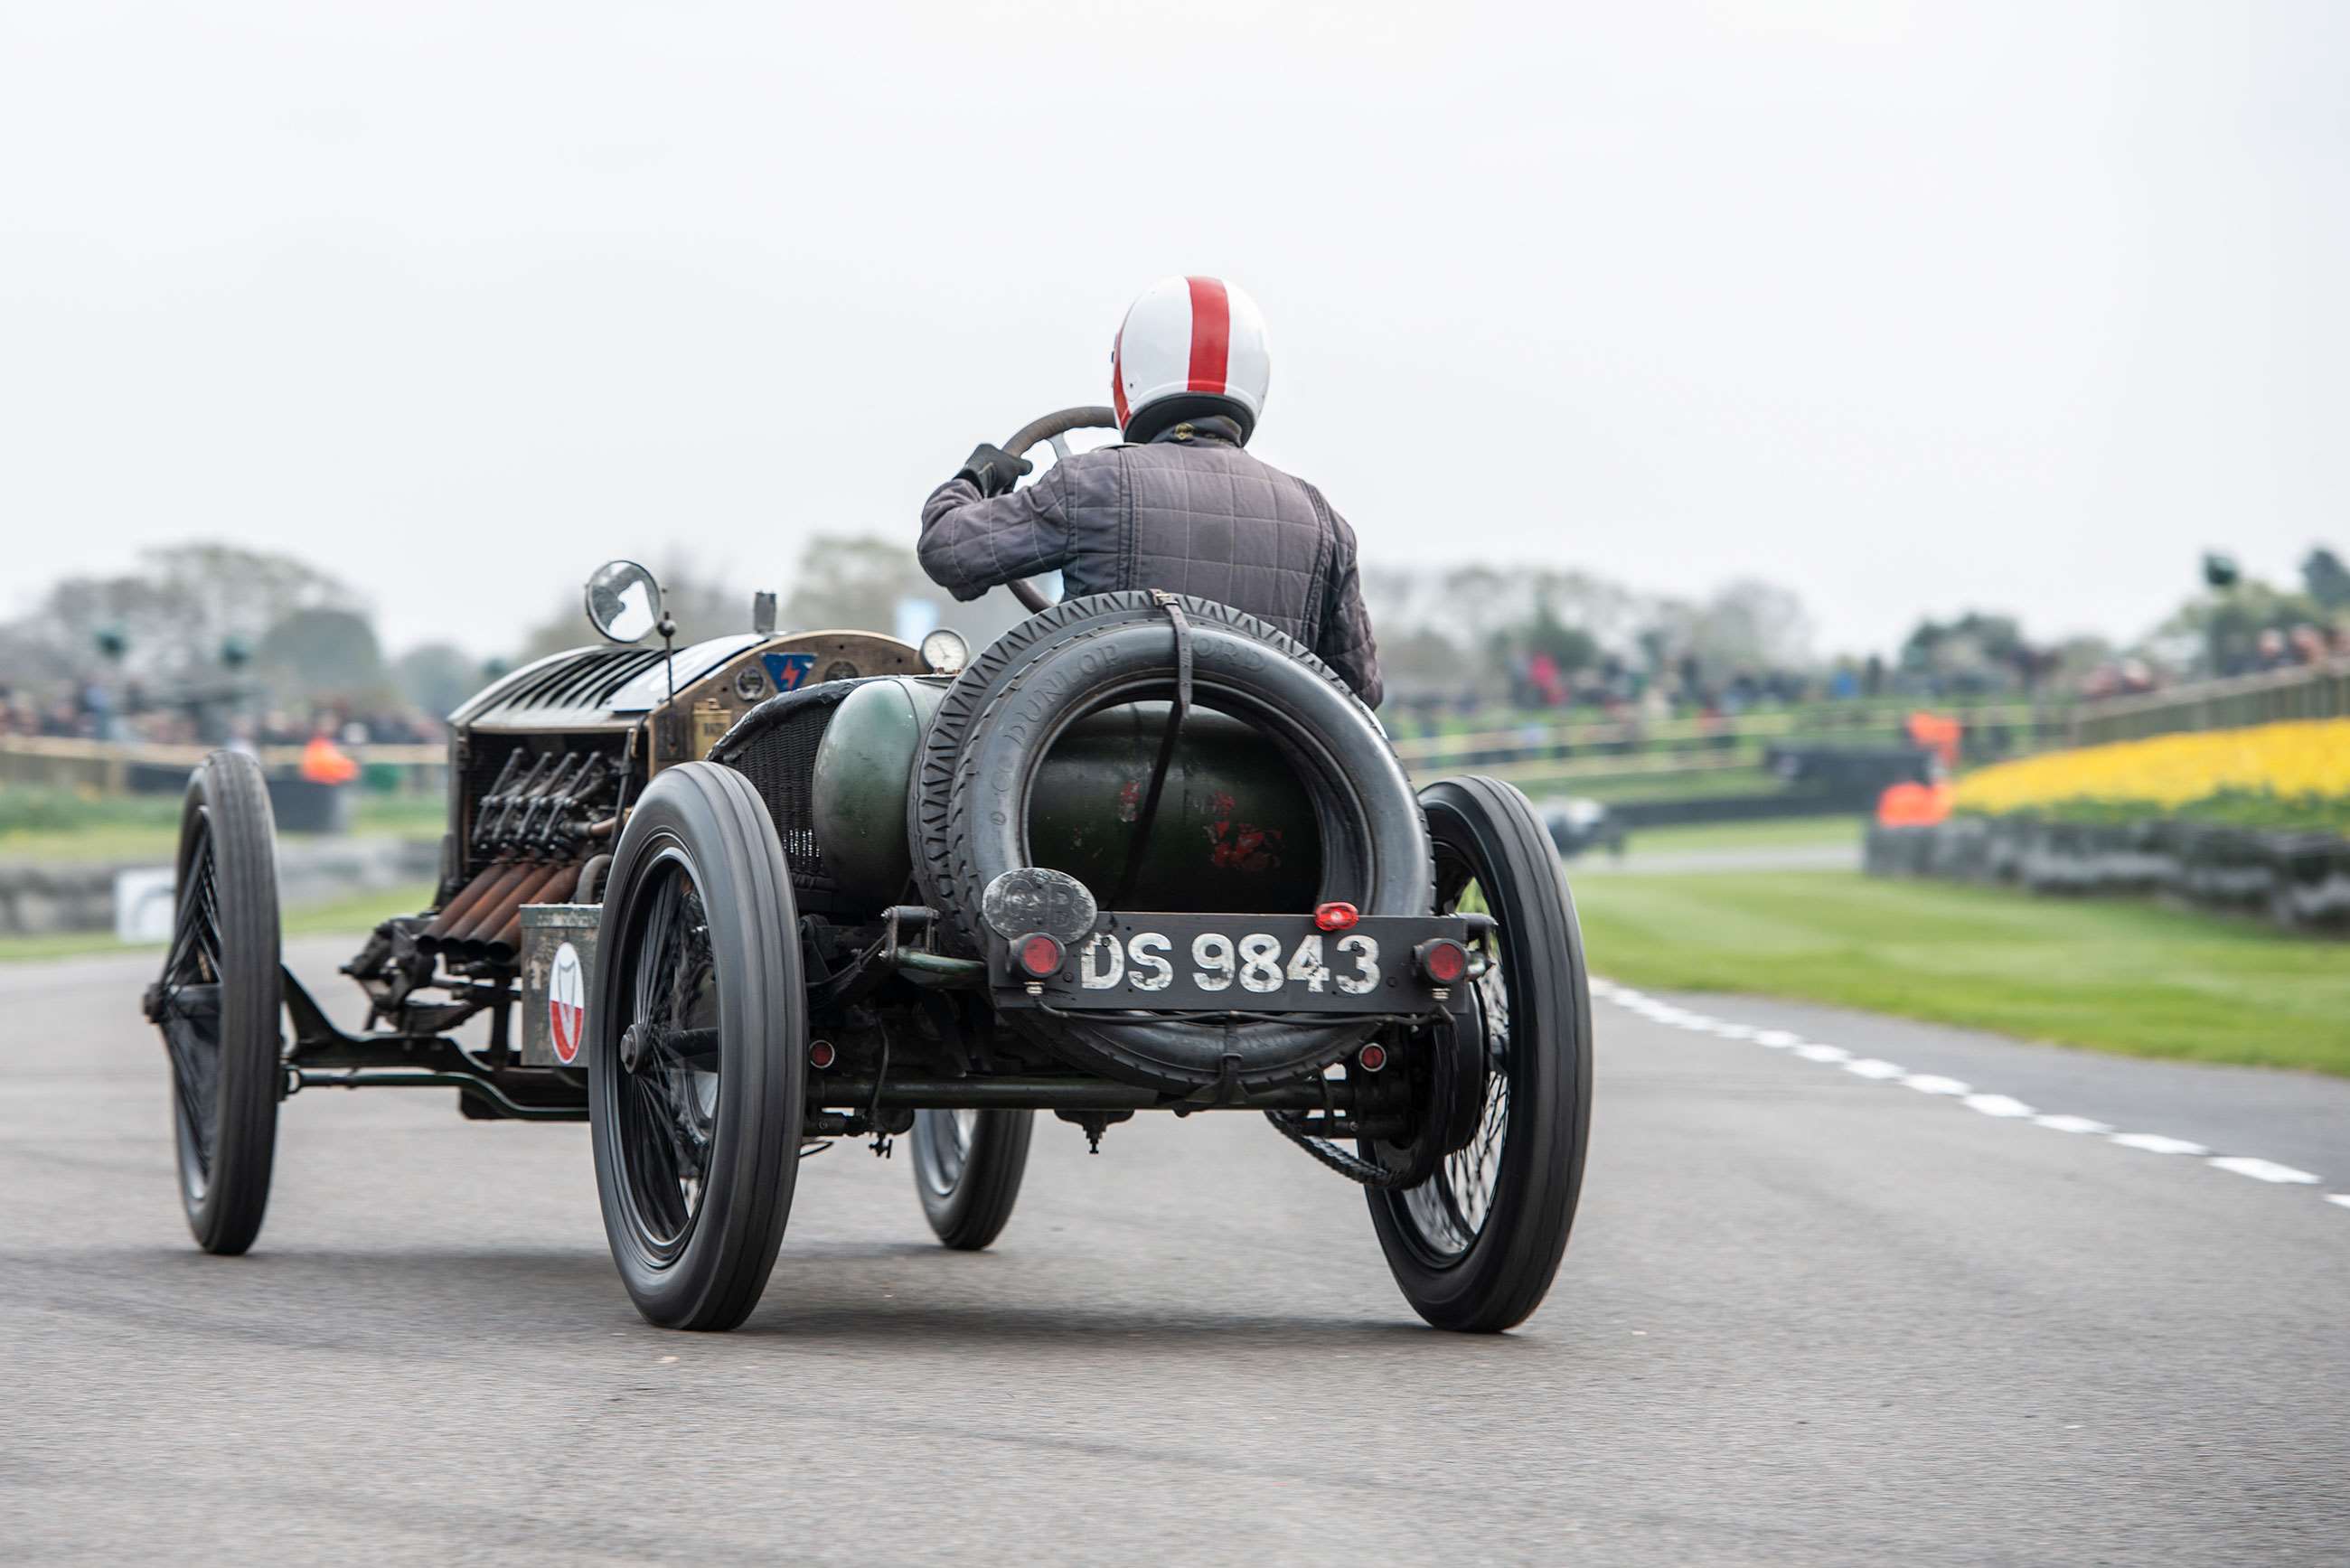 The 1913 Monarch Special of Duncan Pittaway, driven by Mark Walker during the S.F. Edge Trophy at 77MM. Image by Paul Melbert.